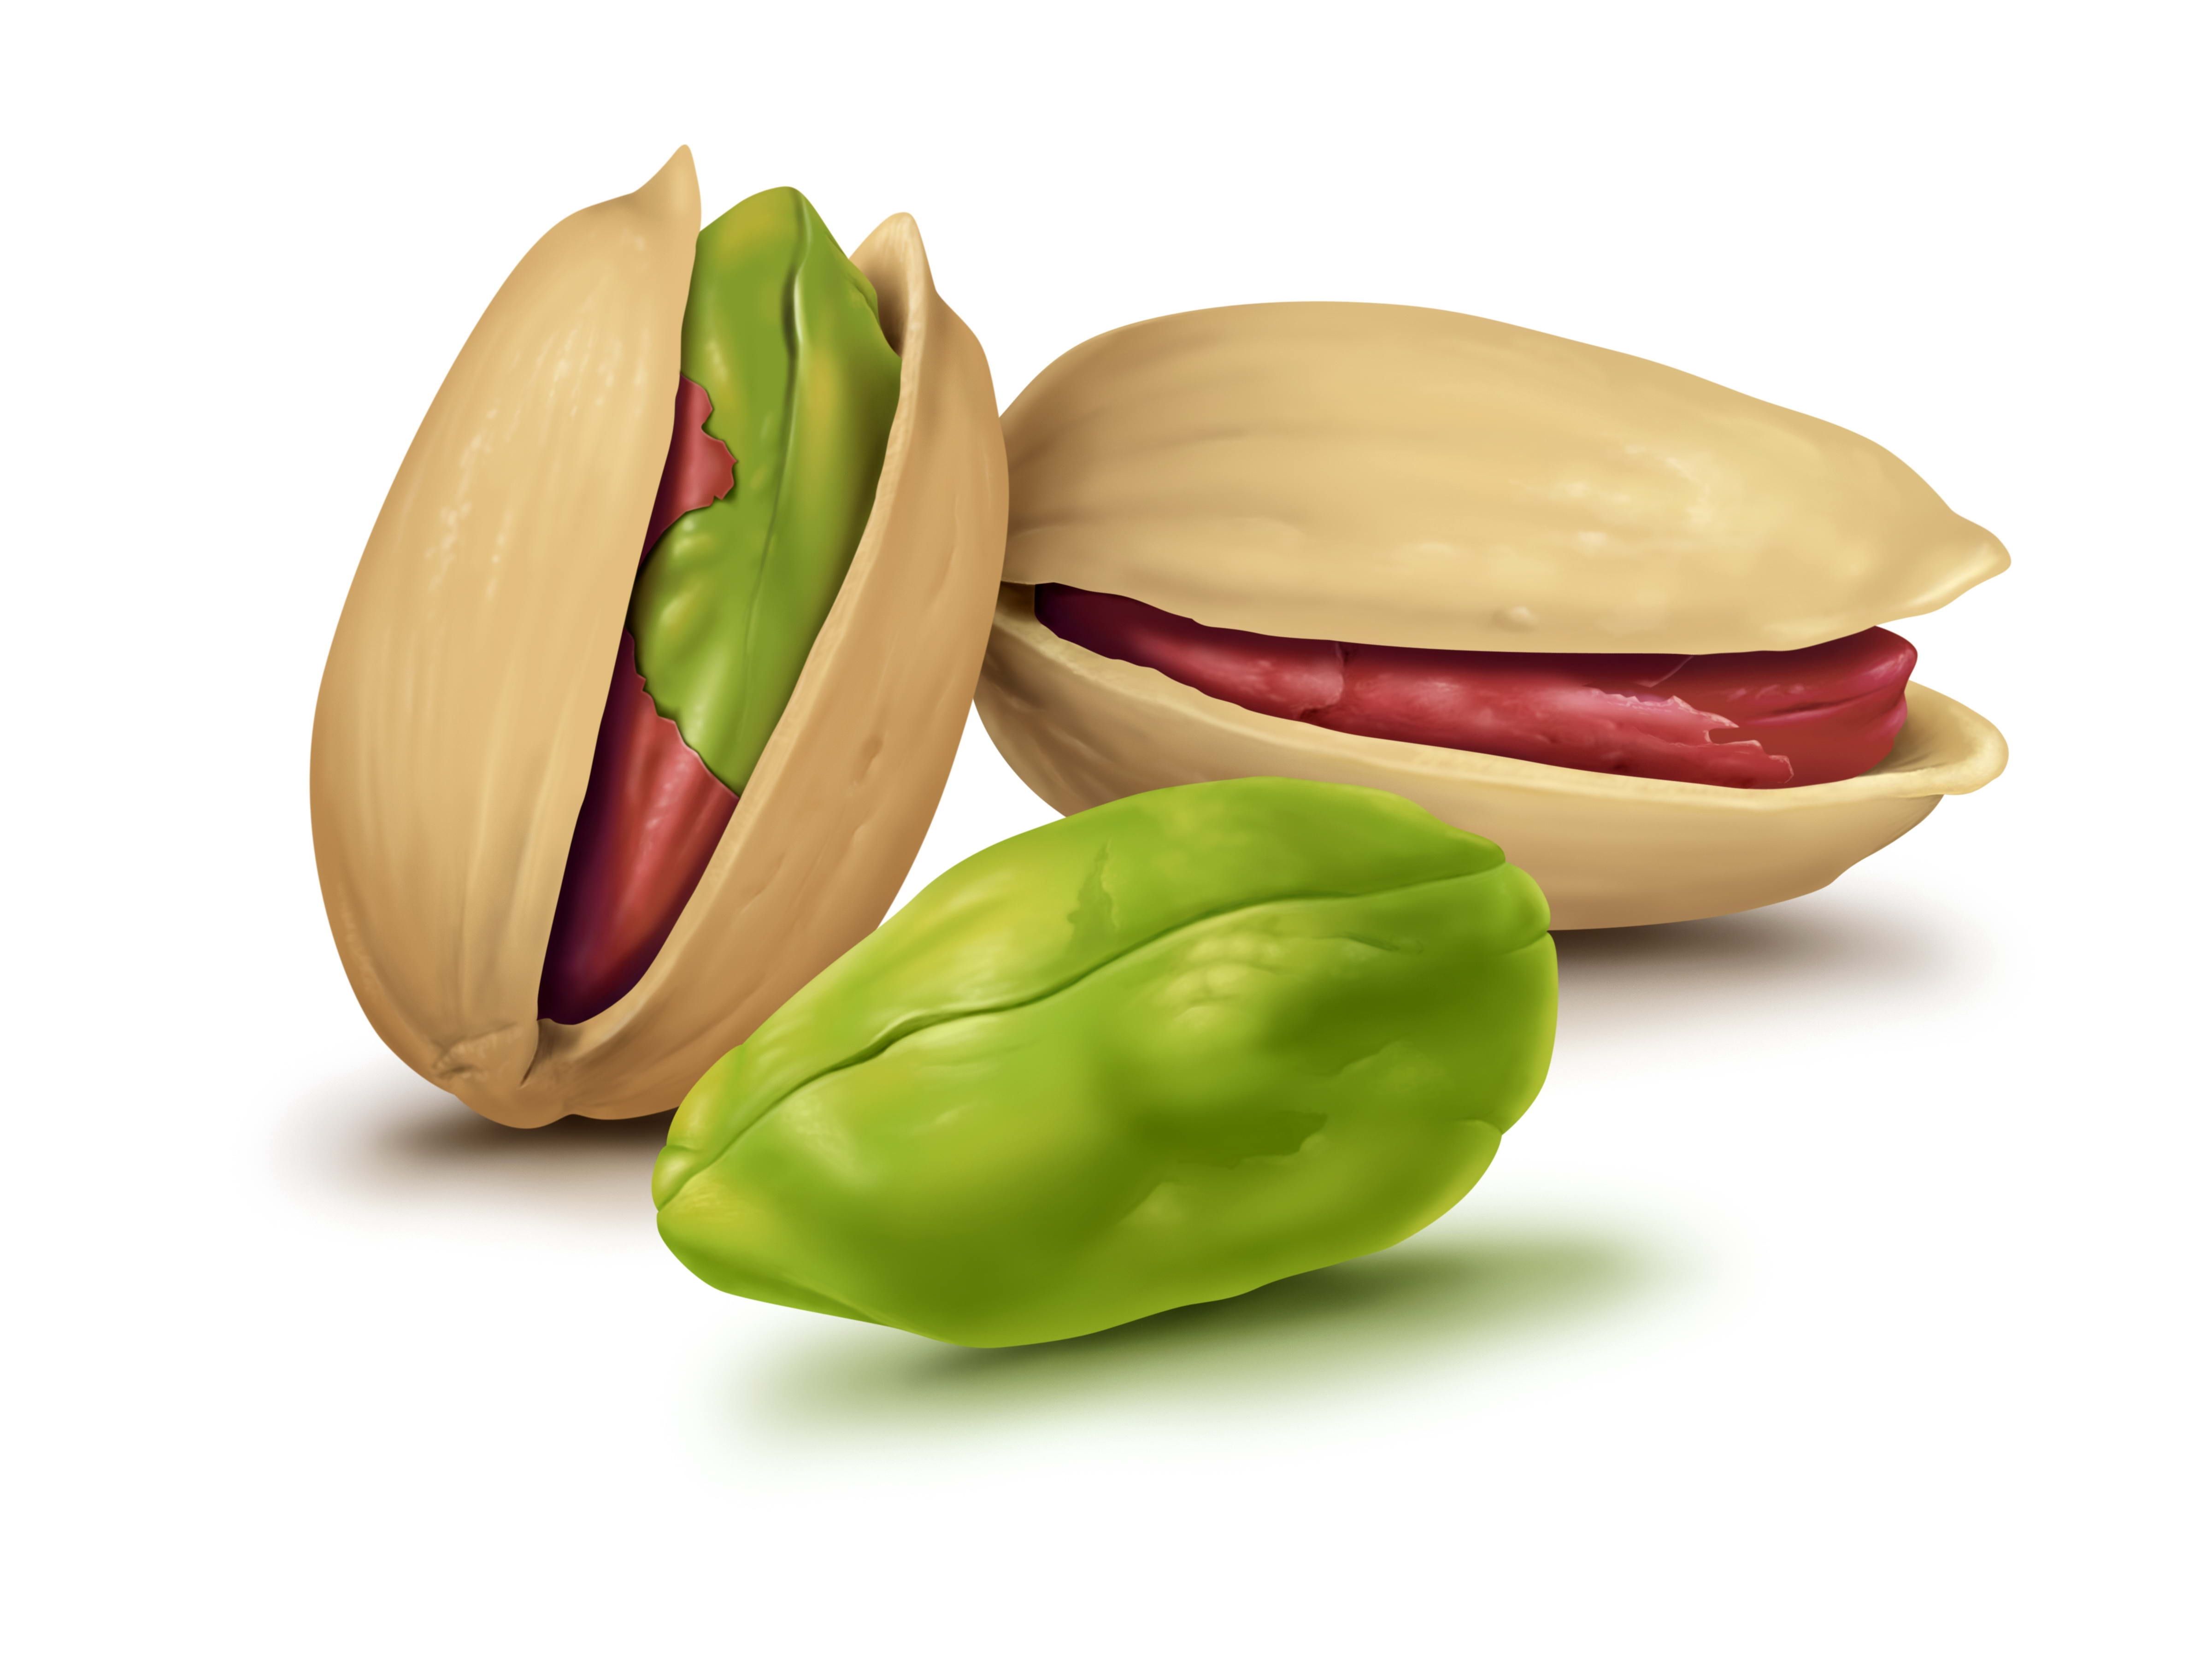 Wallpaper, pistachios, graphics, nuts, white background 4800x3600